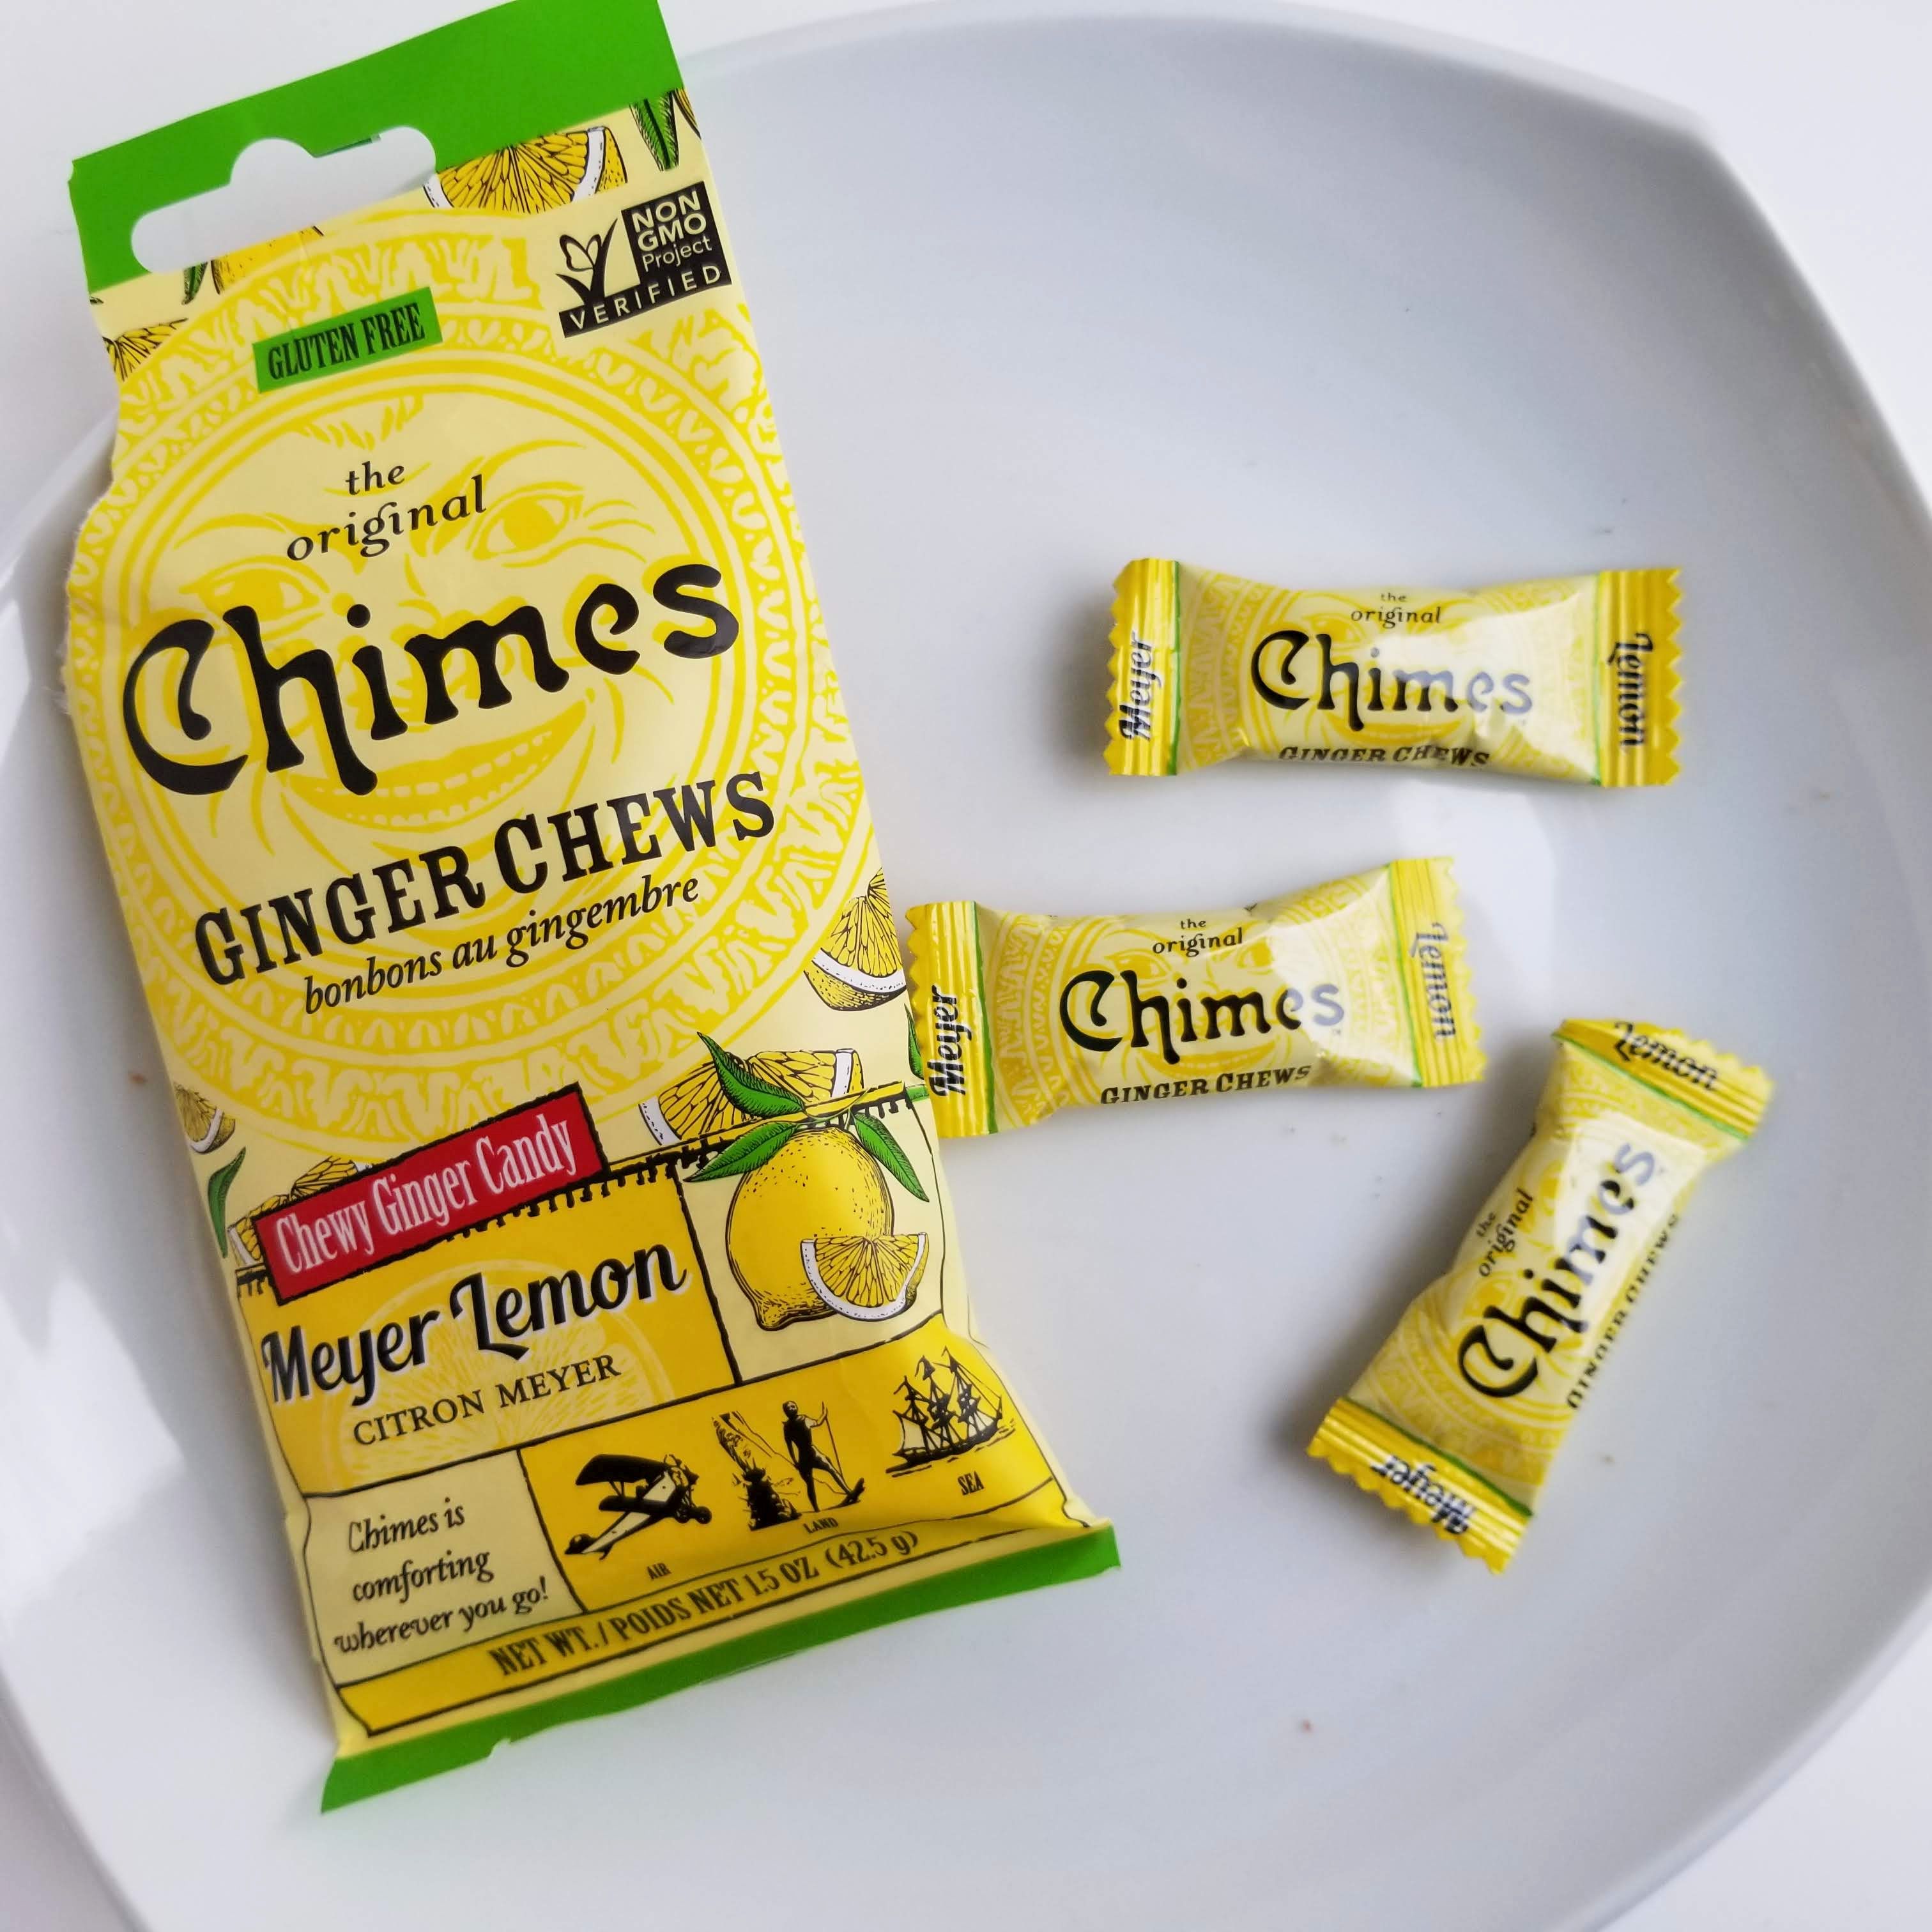 Snack Nation January 2020 ginger chews open